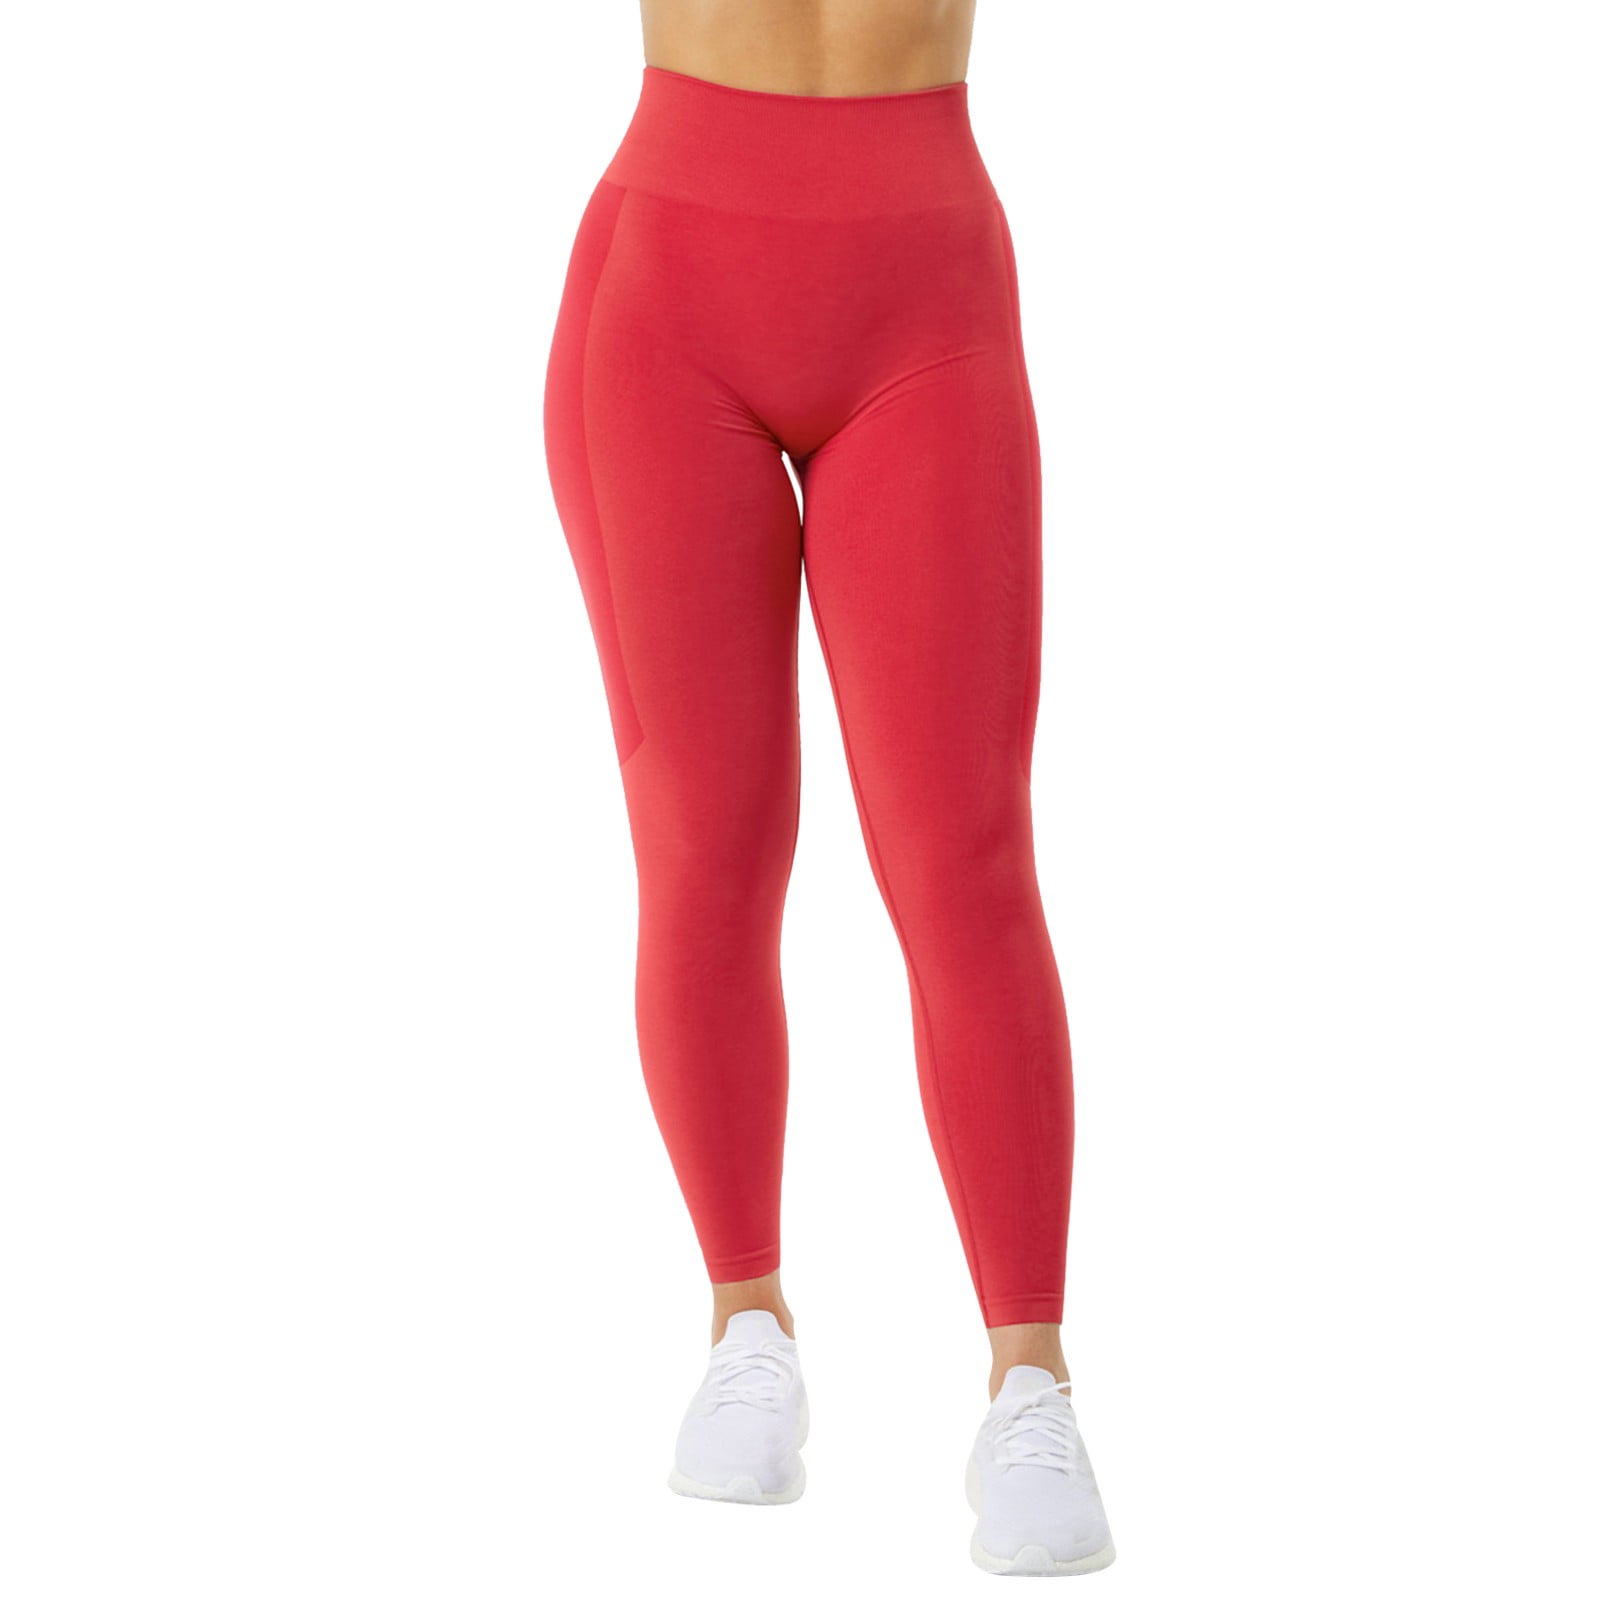 Baocc High Waisted Leggings Tummy Control High Waisted Leggings for  Women-Soft Athletic Tummy Control Pants for Running Yoga Workout Reg & Plus  Size